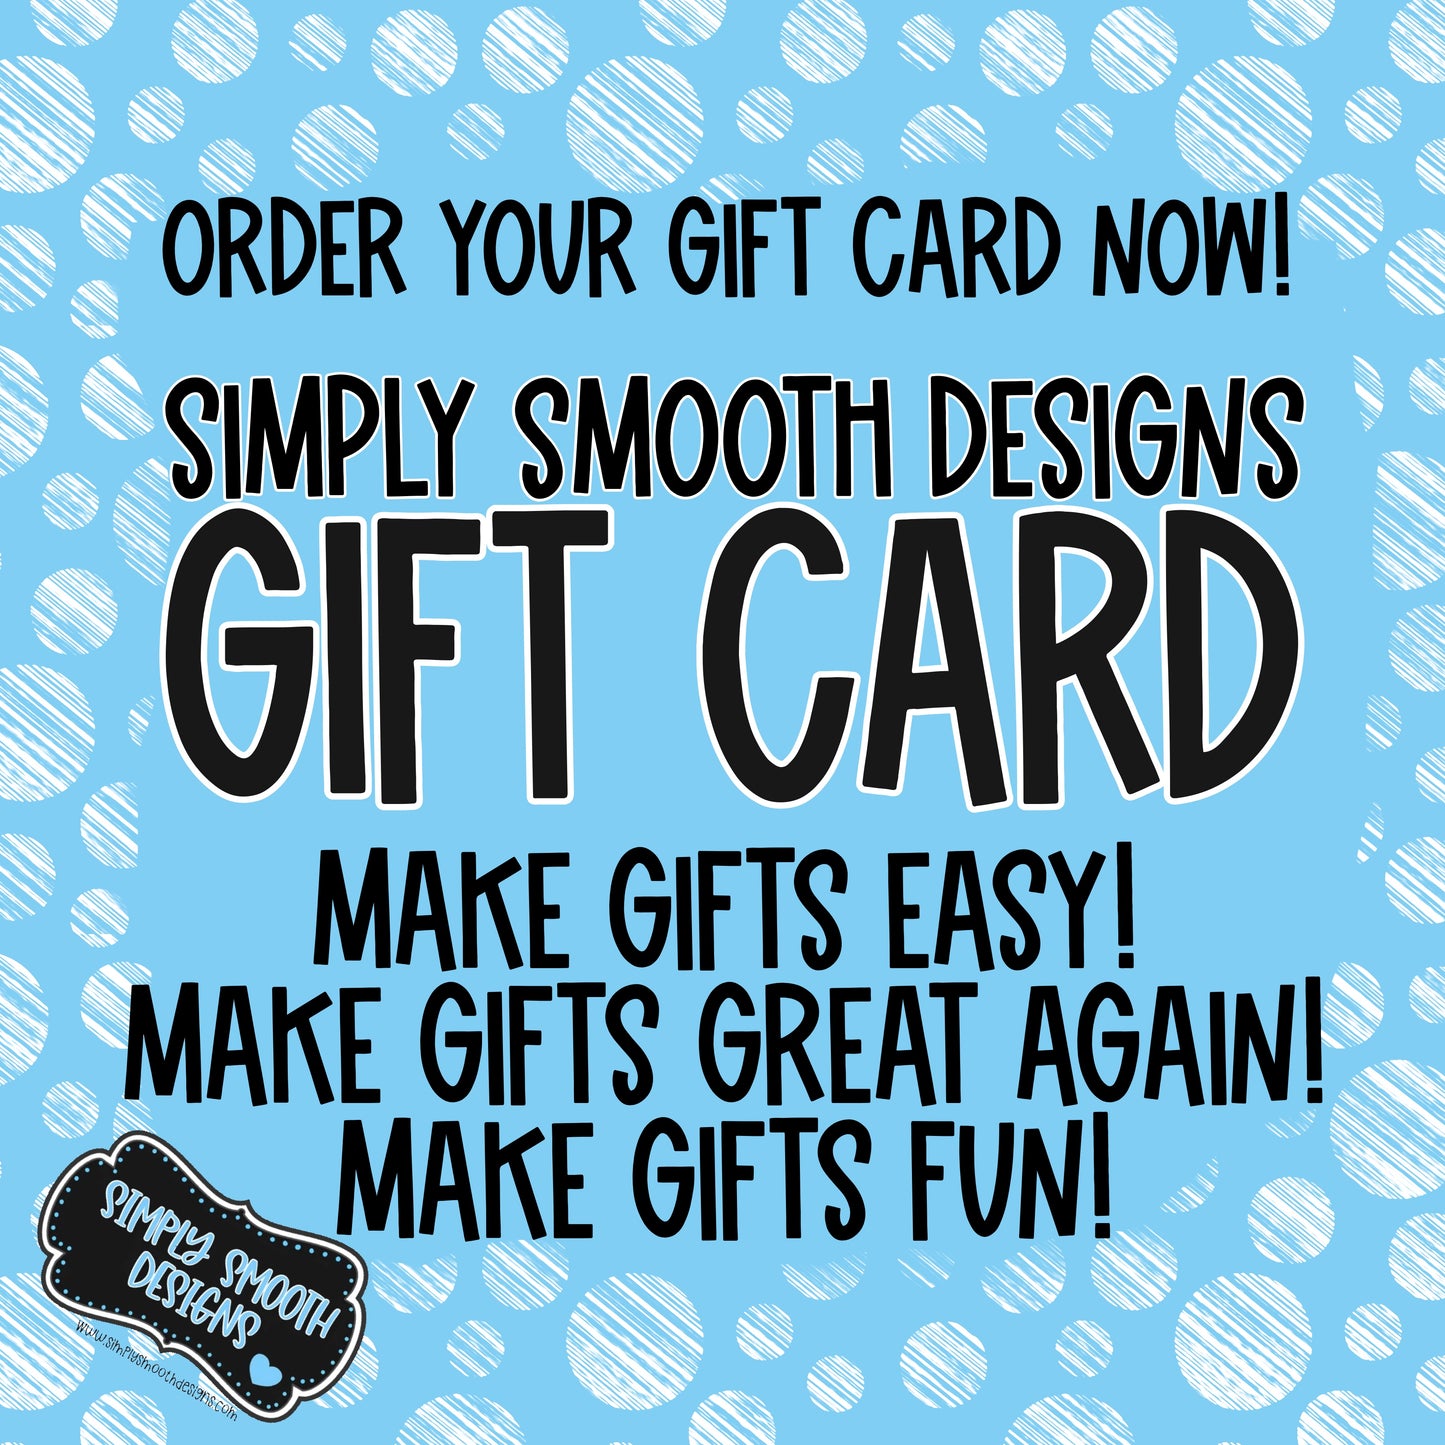 Simply Smooth Designs Gift Card